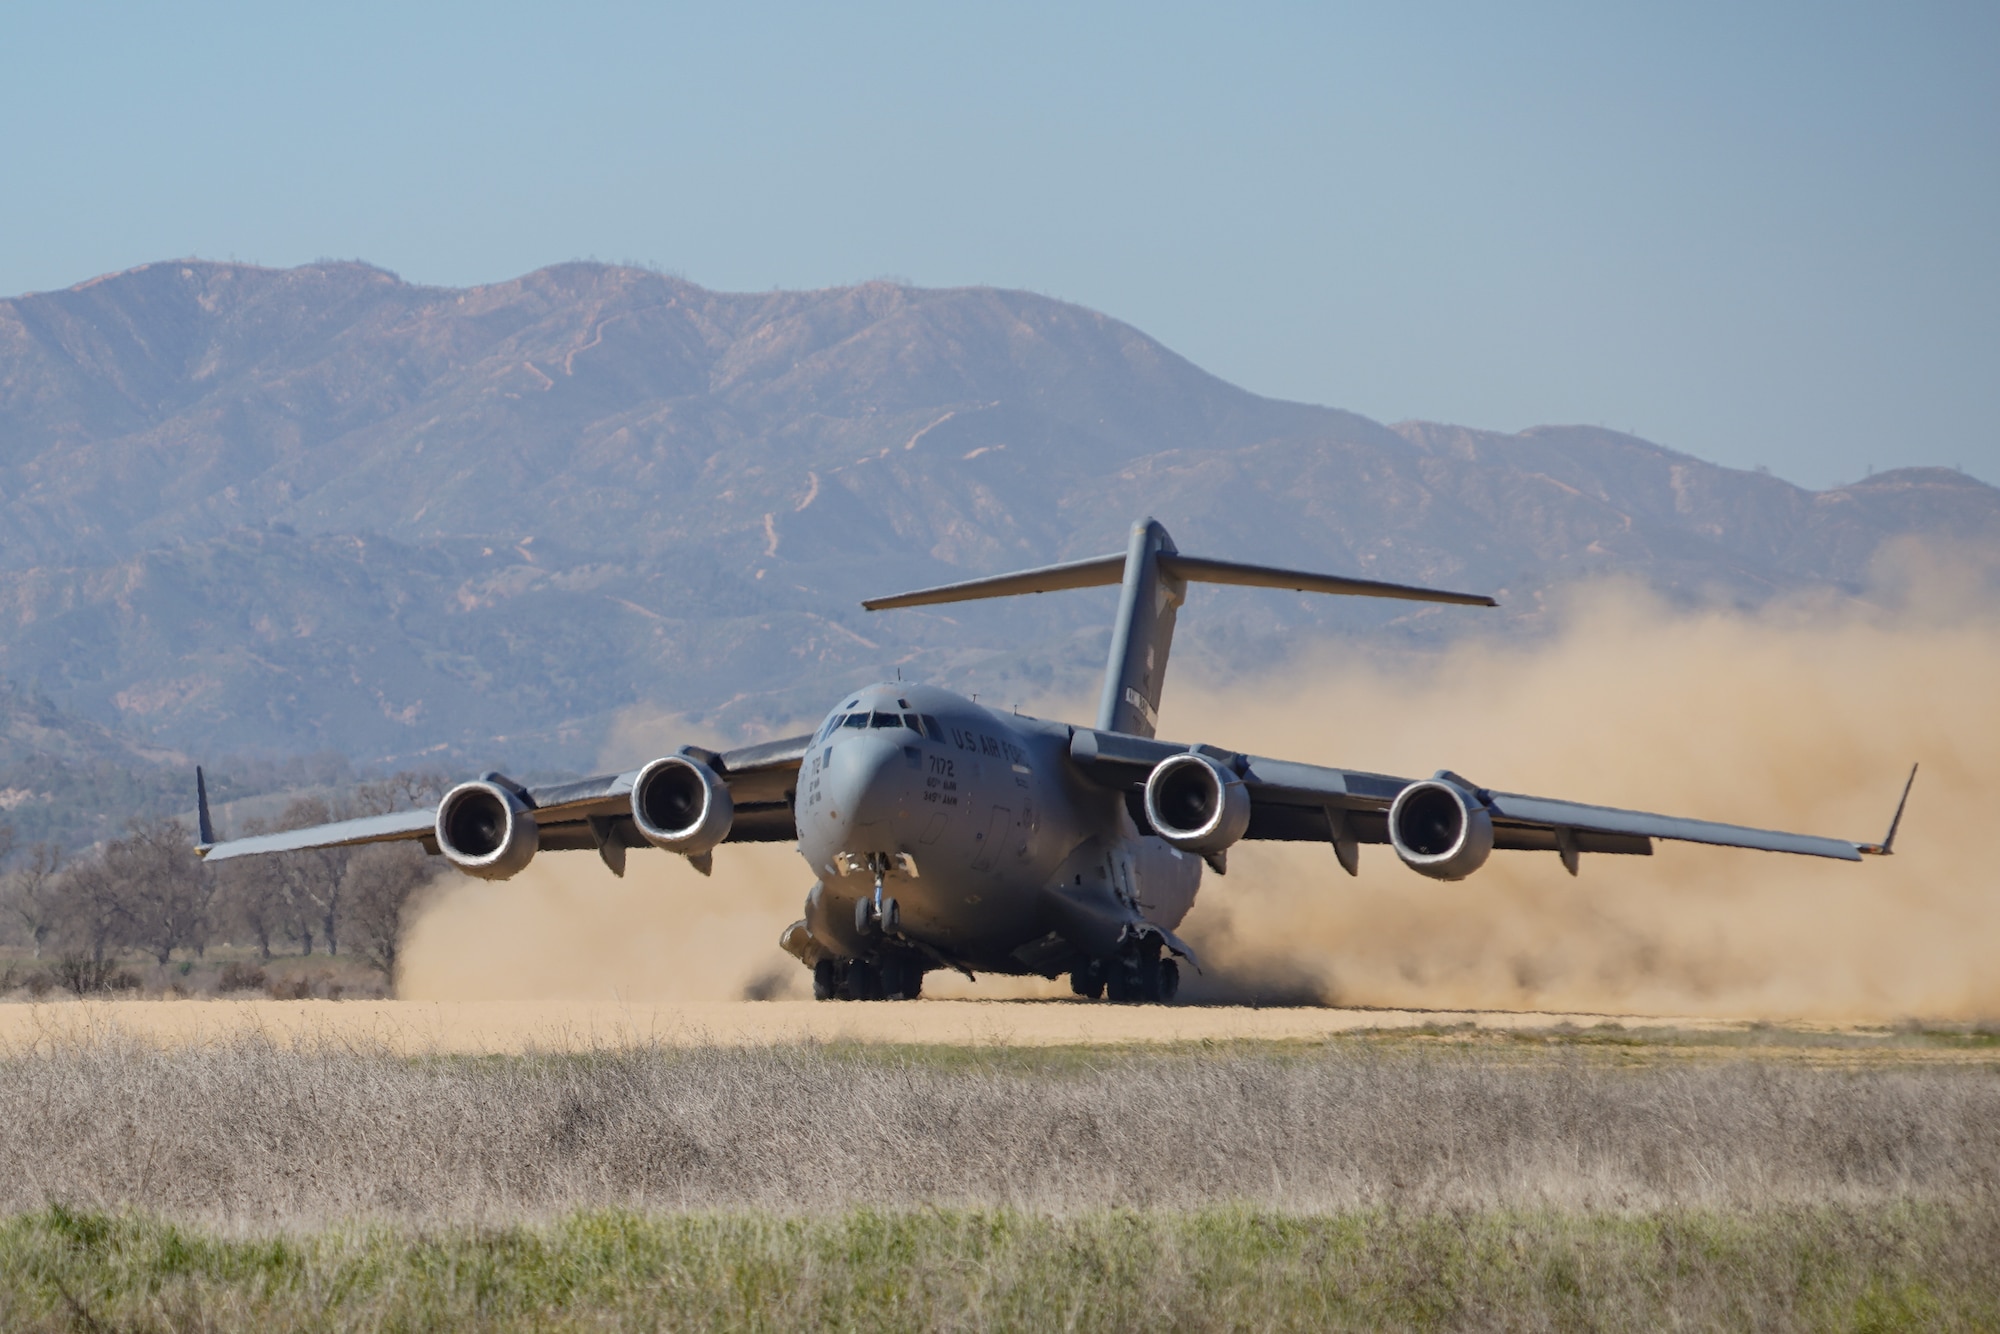 A U.S. Air Force C-17 assigned to the 21st Airlift Squadron departs on an improvised dirt runway at Fort Hunter Liggett, California, Feb. 8, 2022. The 146th Contingency Response Flight and the 621st Contingency Response Wing partnered to accomplish skill-enhancing training and provide airlift support to the 621 CRW's evaluated exercise.